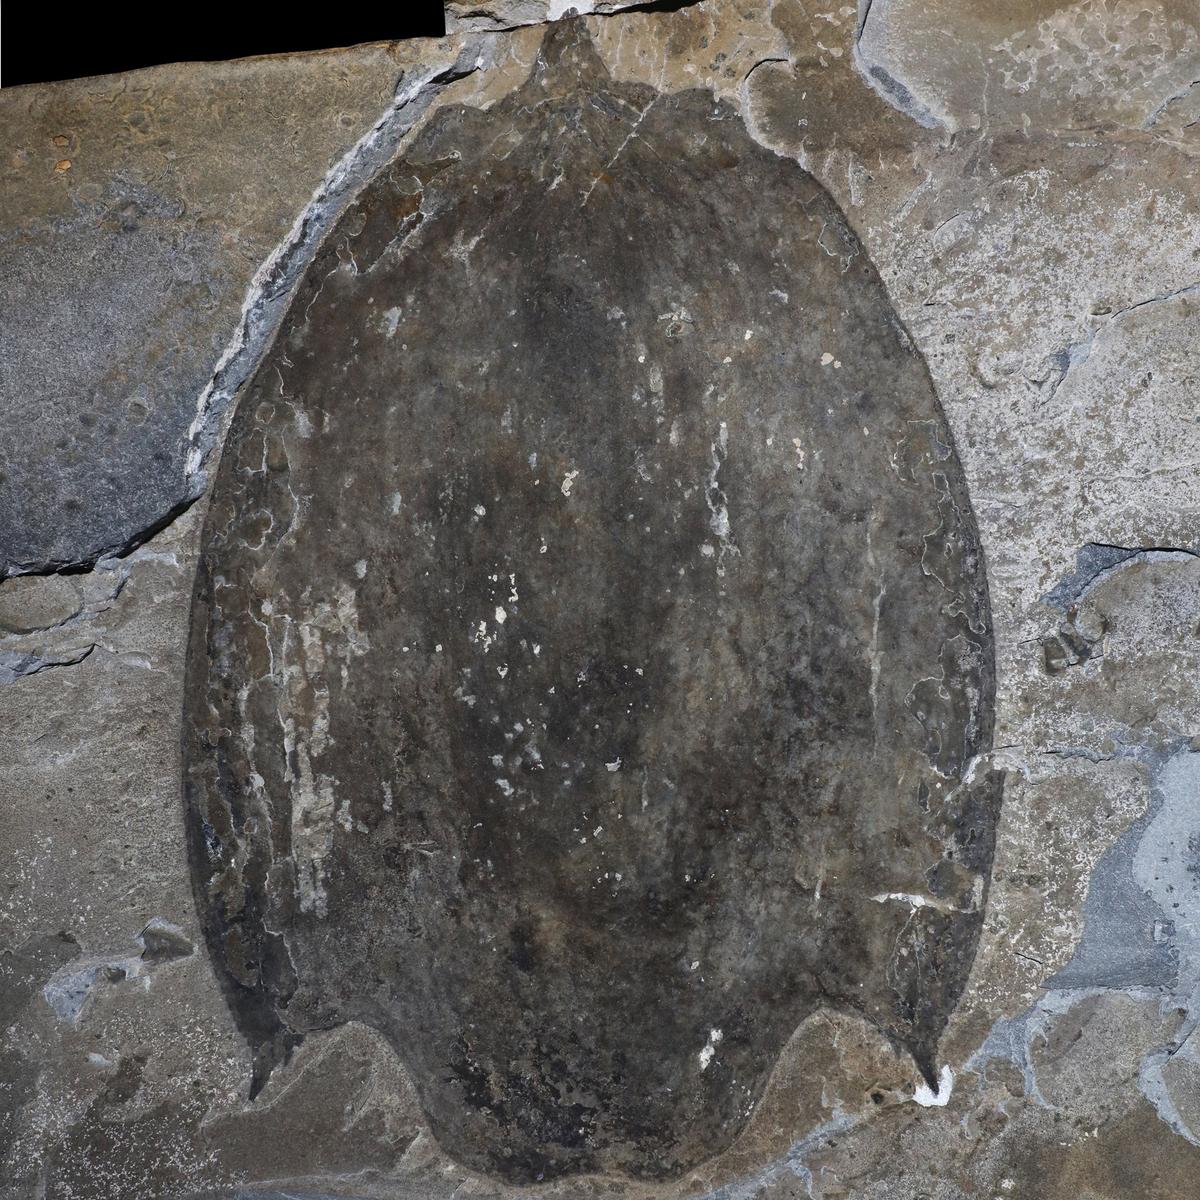  A close-up photo shows a Titanokorys gainesi carapace fossil. (SWNS)